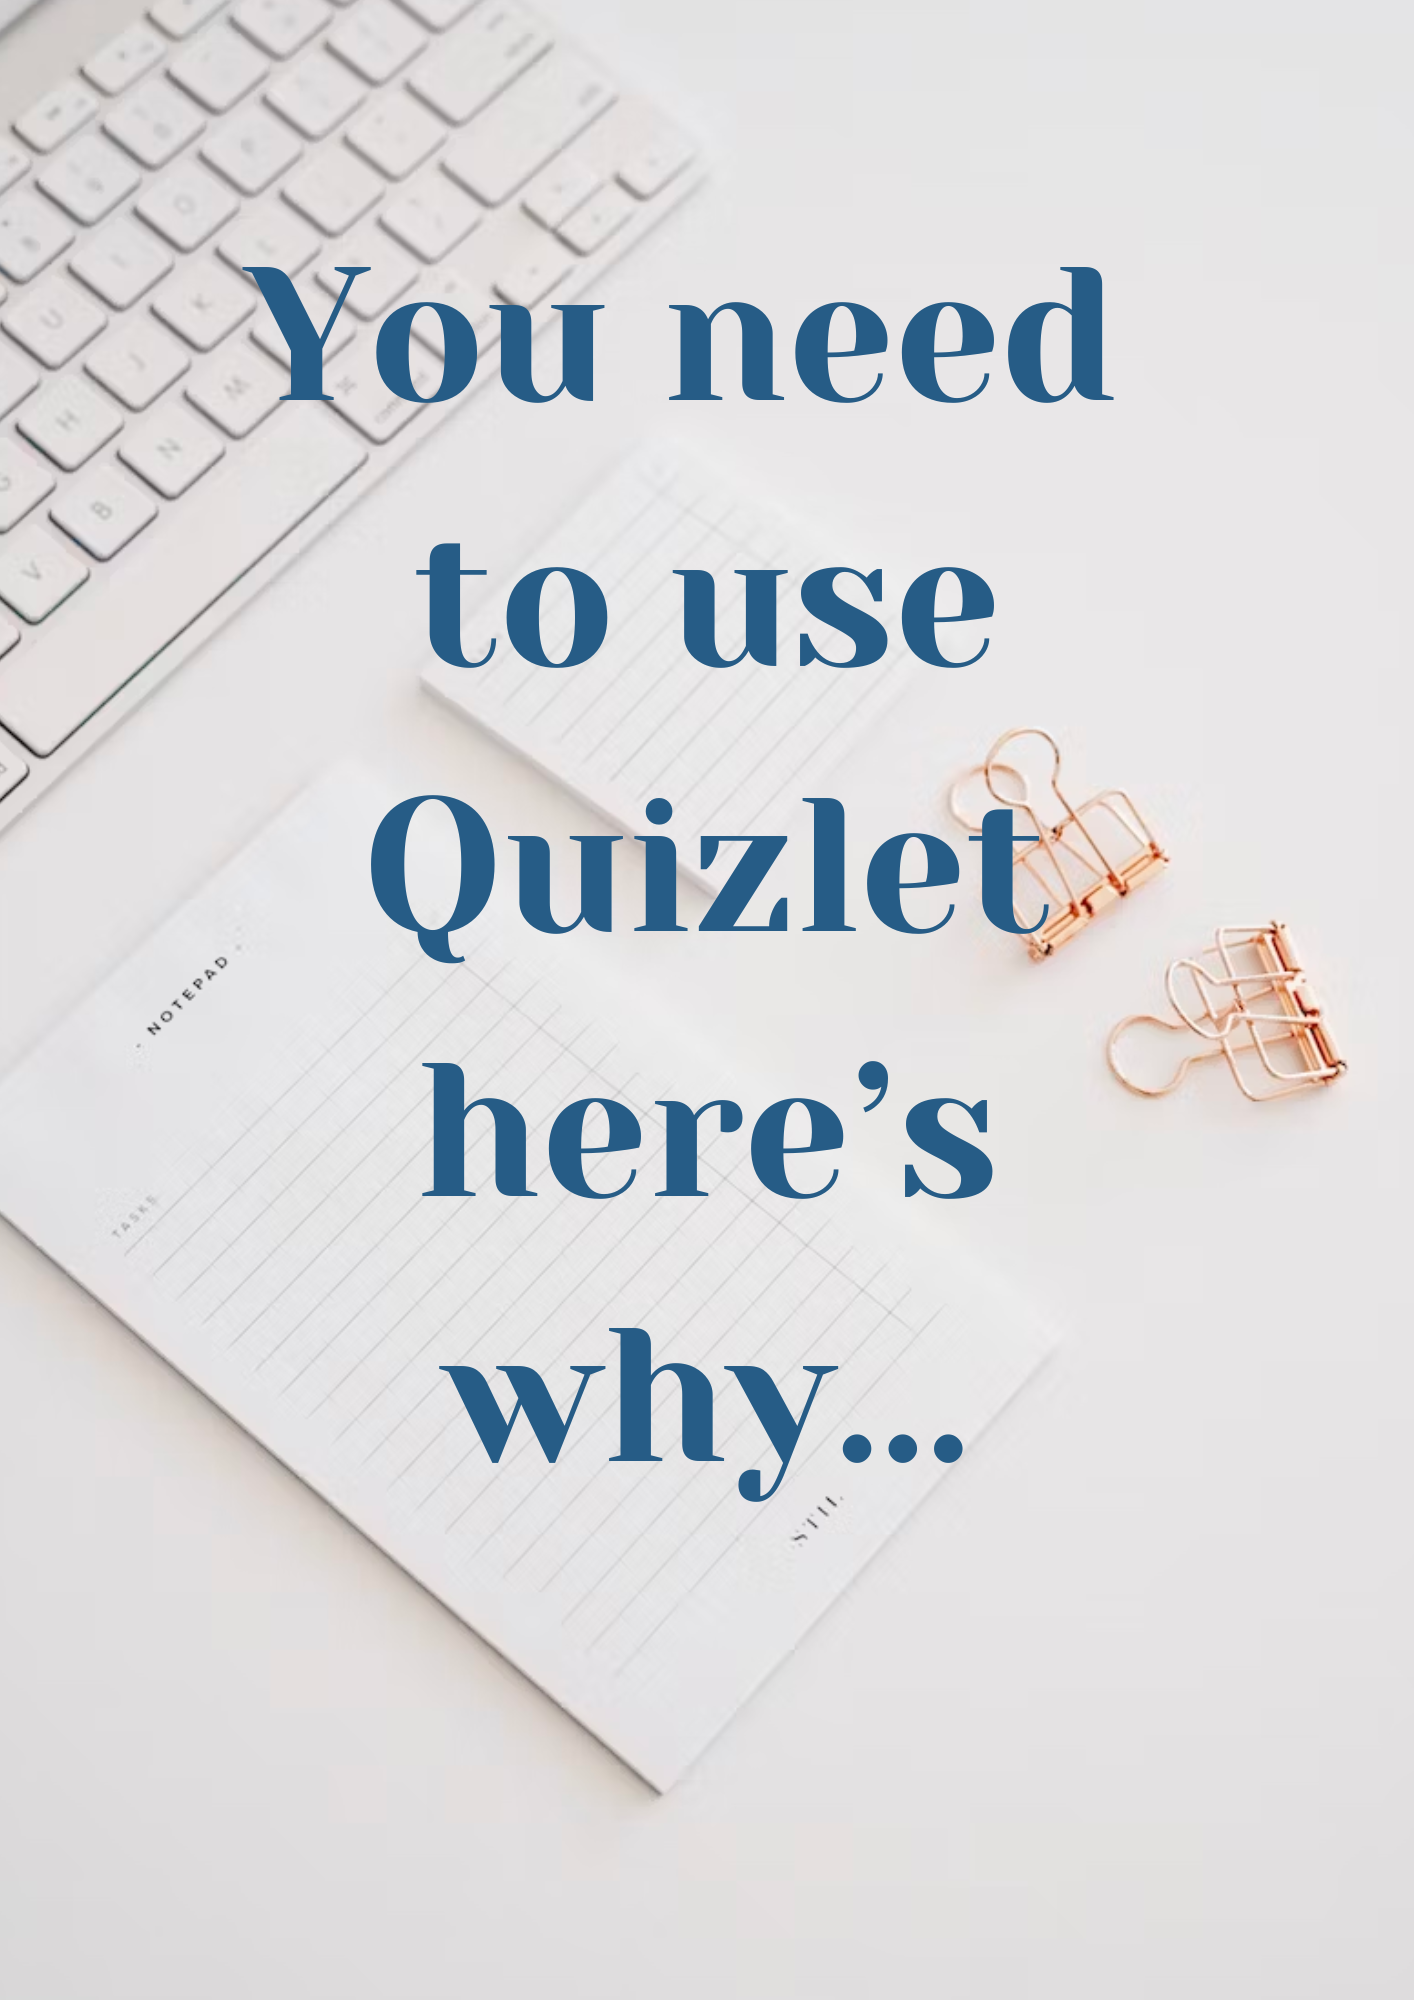 You need to use QUizlet here's why...